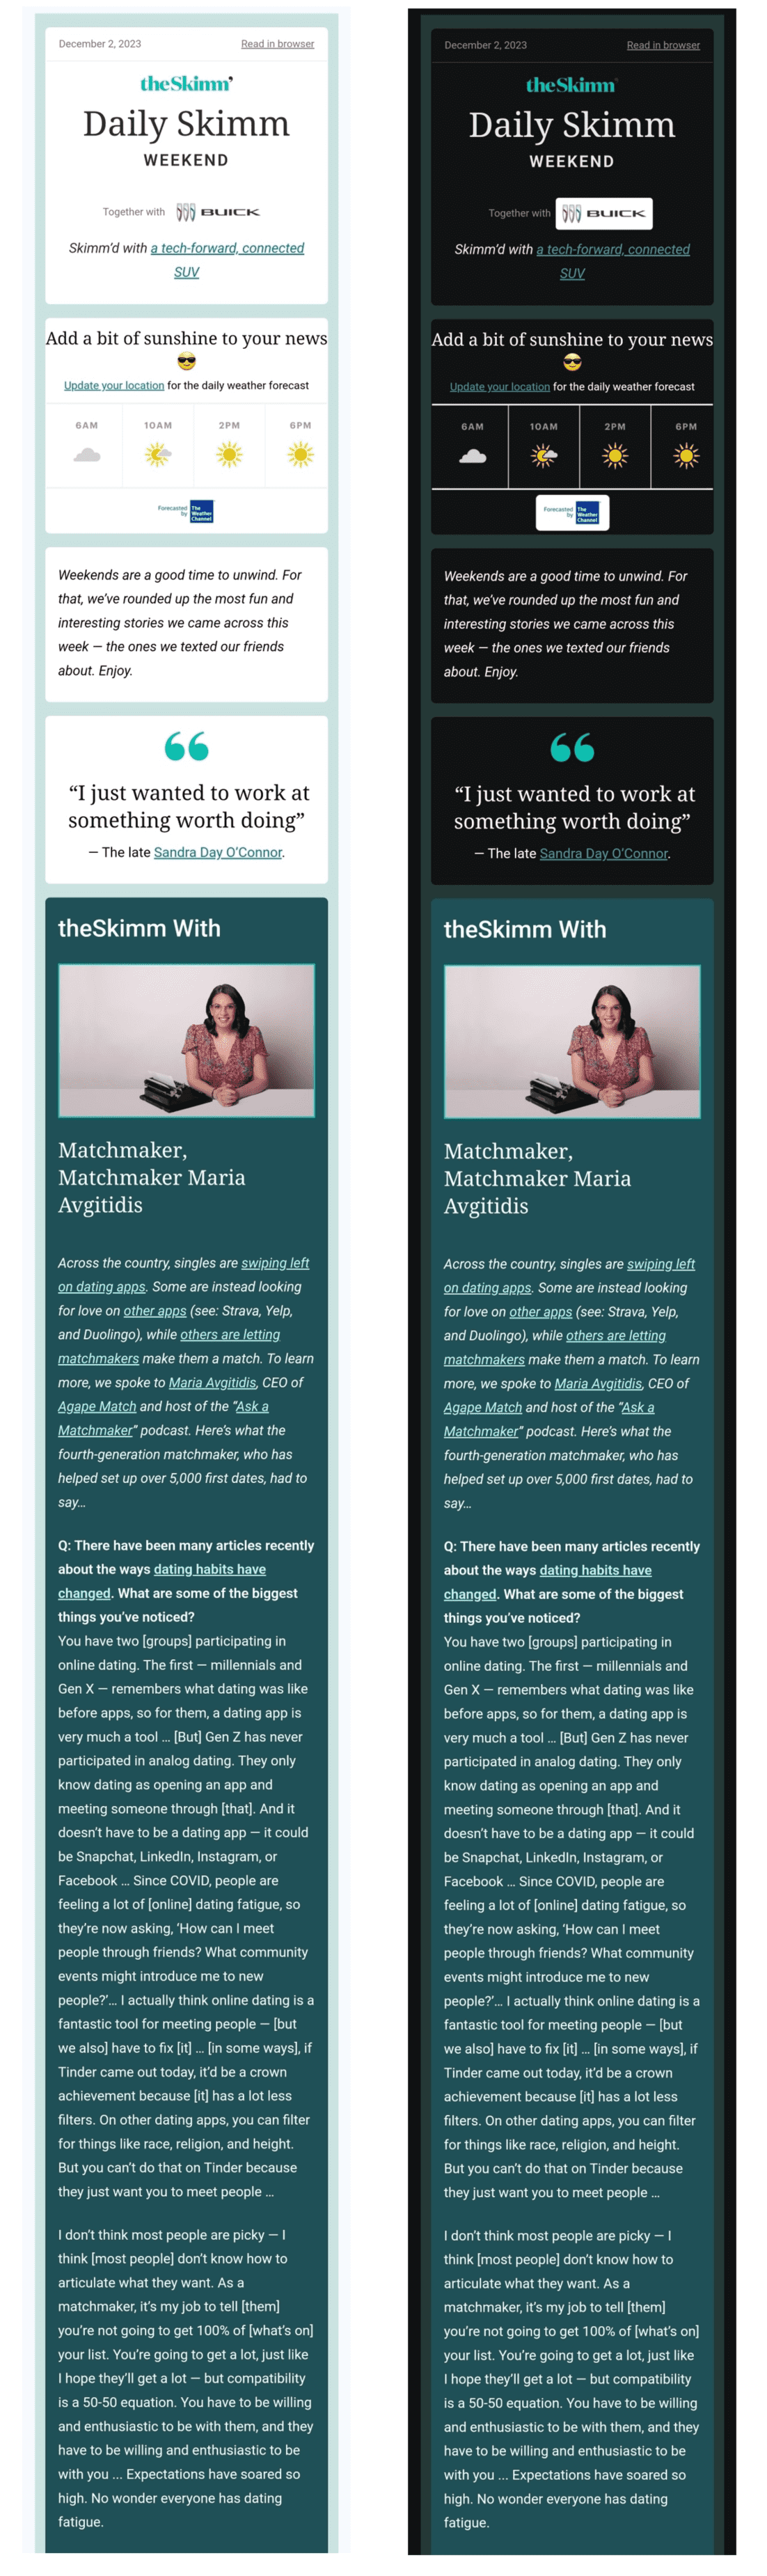 Two versions of email from theSkimm side by side — light mode and dark mode